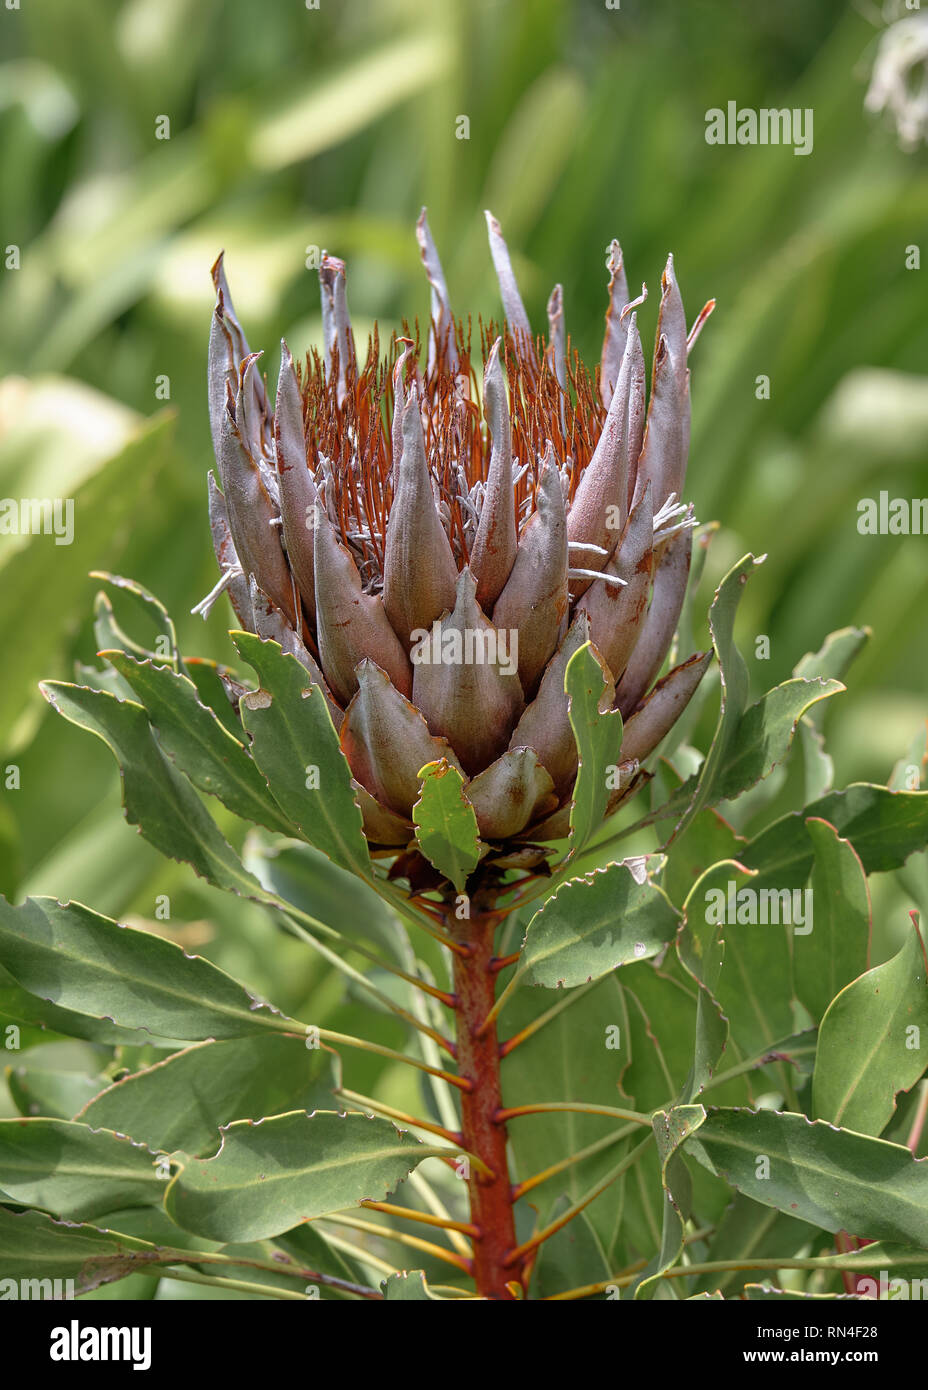 King Protea flower (Protea cynaroides) dried on stem, against green blurry bush Stock Photo